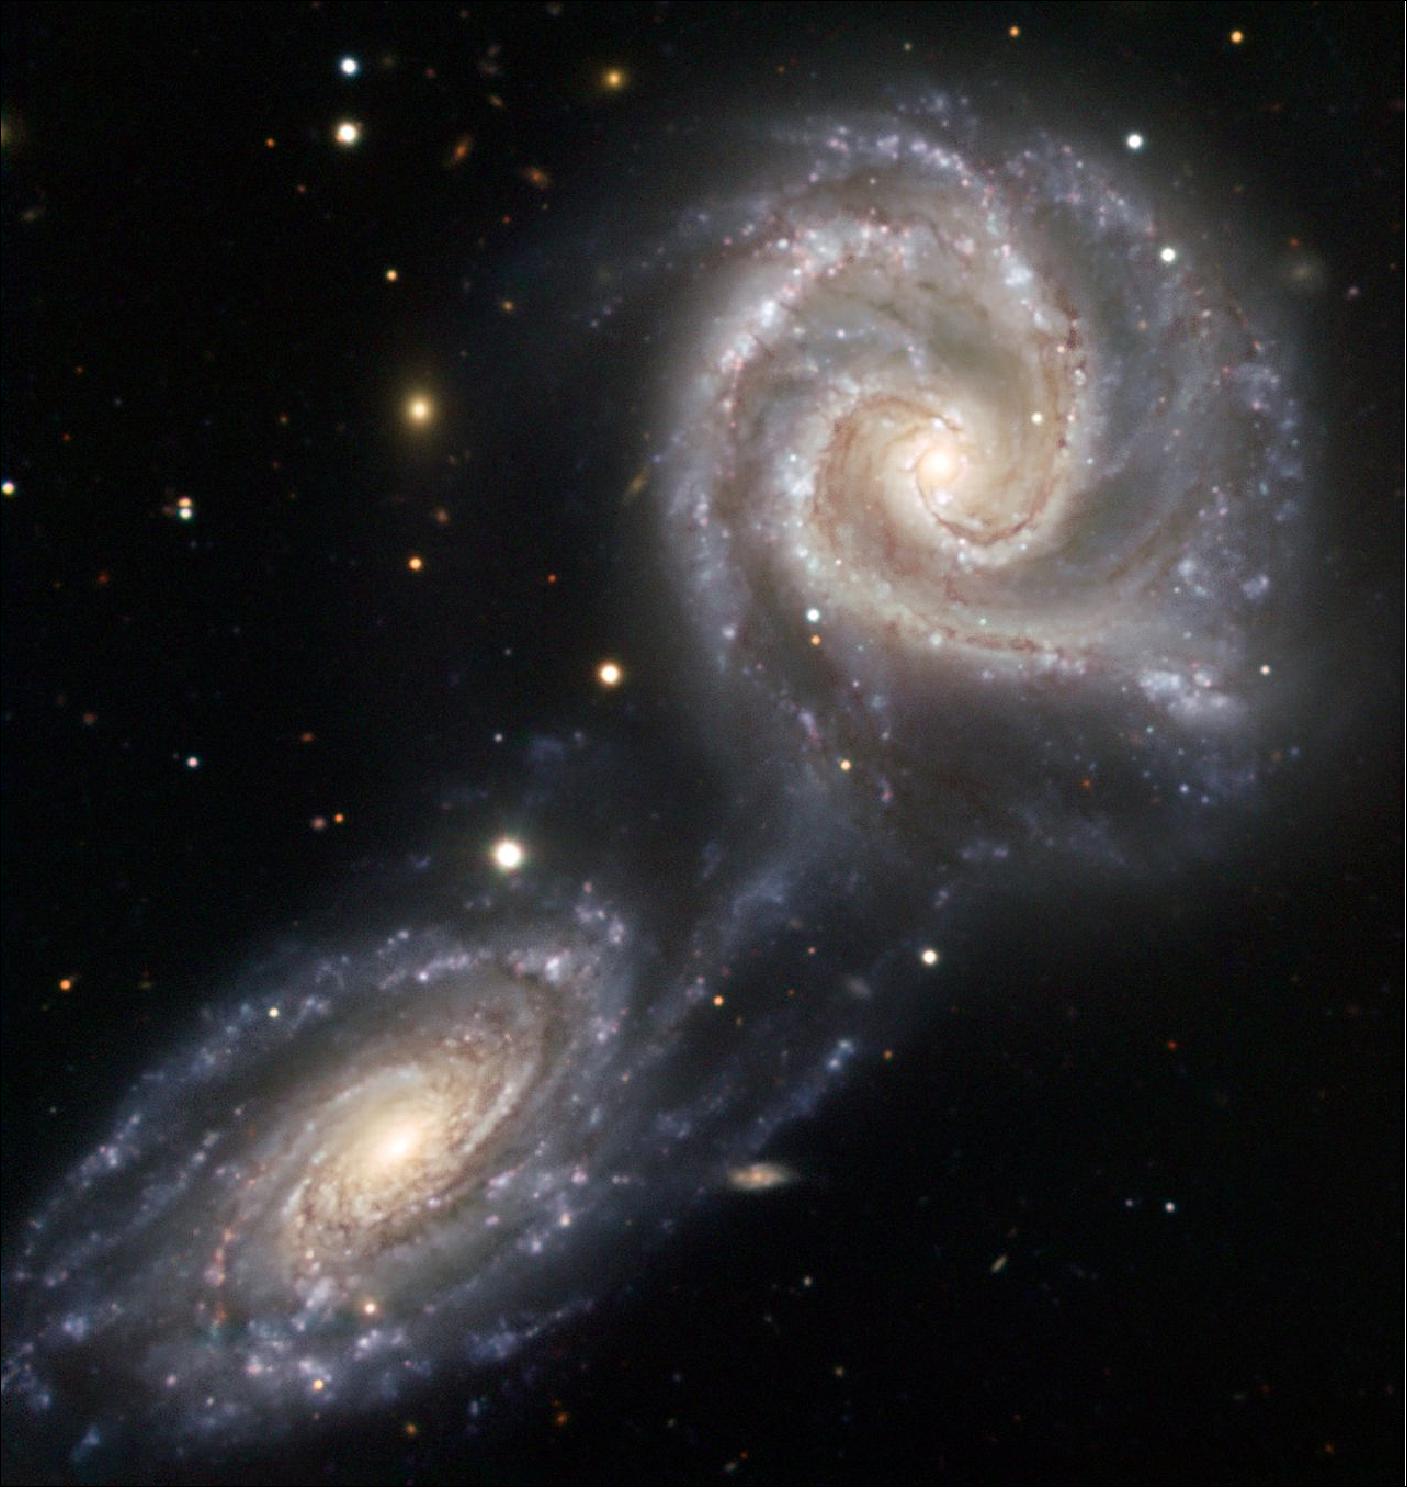 Figure 17: NGC 5426 and NGC 5427 are two spiral galaxies of similar sizes engaged in a dramatic dance. It is not certain that this interaction will end in a collision and ultimately a merging of the two galaxies, although the galaxies have already been affected. Together known as Arp 271, this dance will last for tens of millions of years, creating new stars as a result of the mutual gravitational attraction between the galaxies, a pull seen in the bridge of stars already connecting the two. Located 90 million light-years away towards the constellation of Virgo (the Virgin), the Arp 271 pair is about 130 000 light-years across. It was originally discovered in 1785 by William Herschel. Quite possibly, our own Milky Way will undergo a similar collision in about five billion years with the neighboring Andromeda galaxy, which is now located about 2.6 million light-years away from the Milky Way (image credit: ESO)